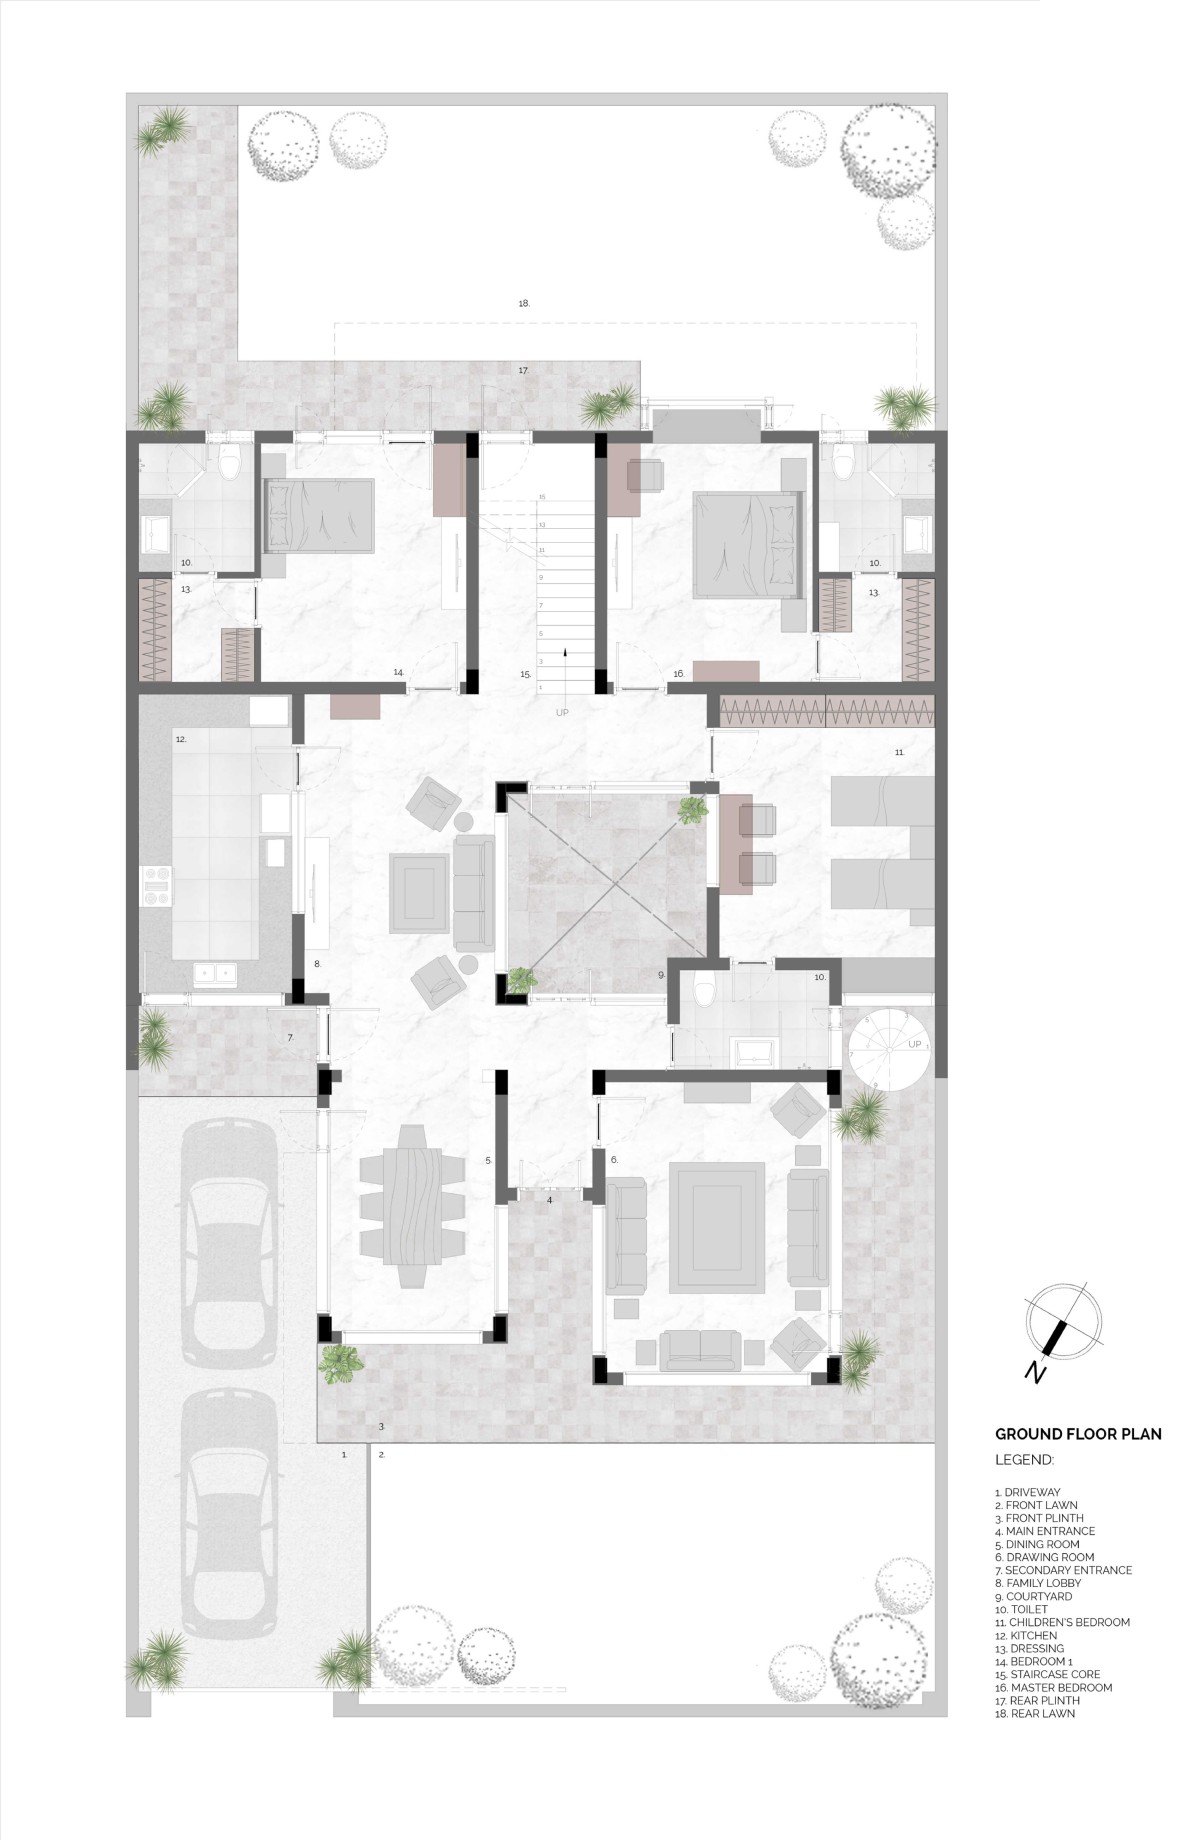 Ground Floor Plan of The Tapered House by Studio Mohenjodaro